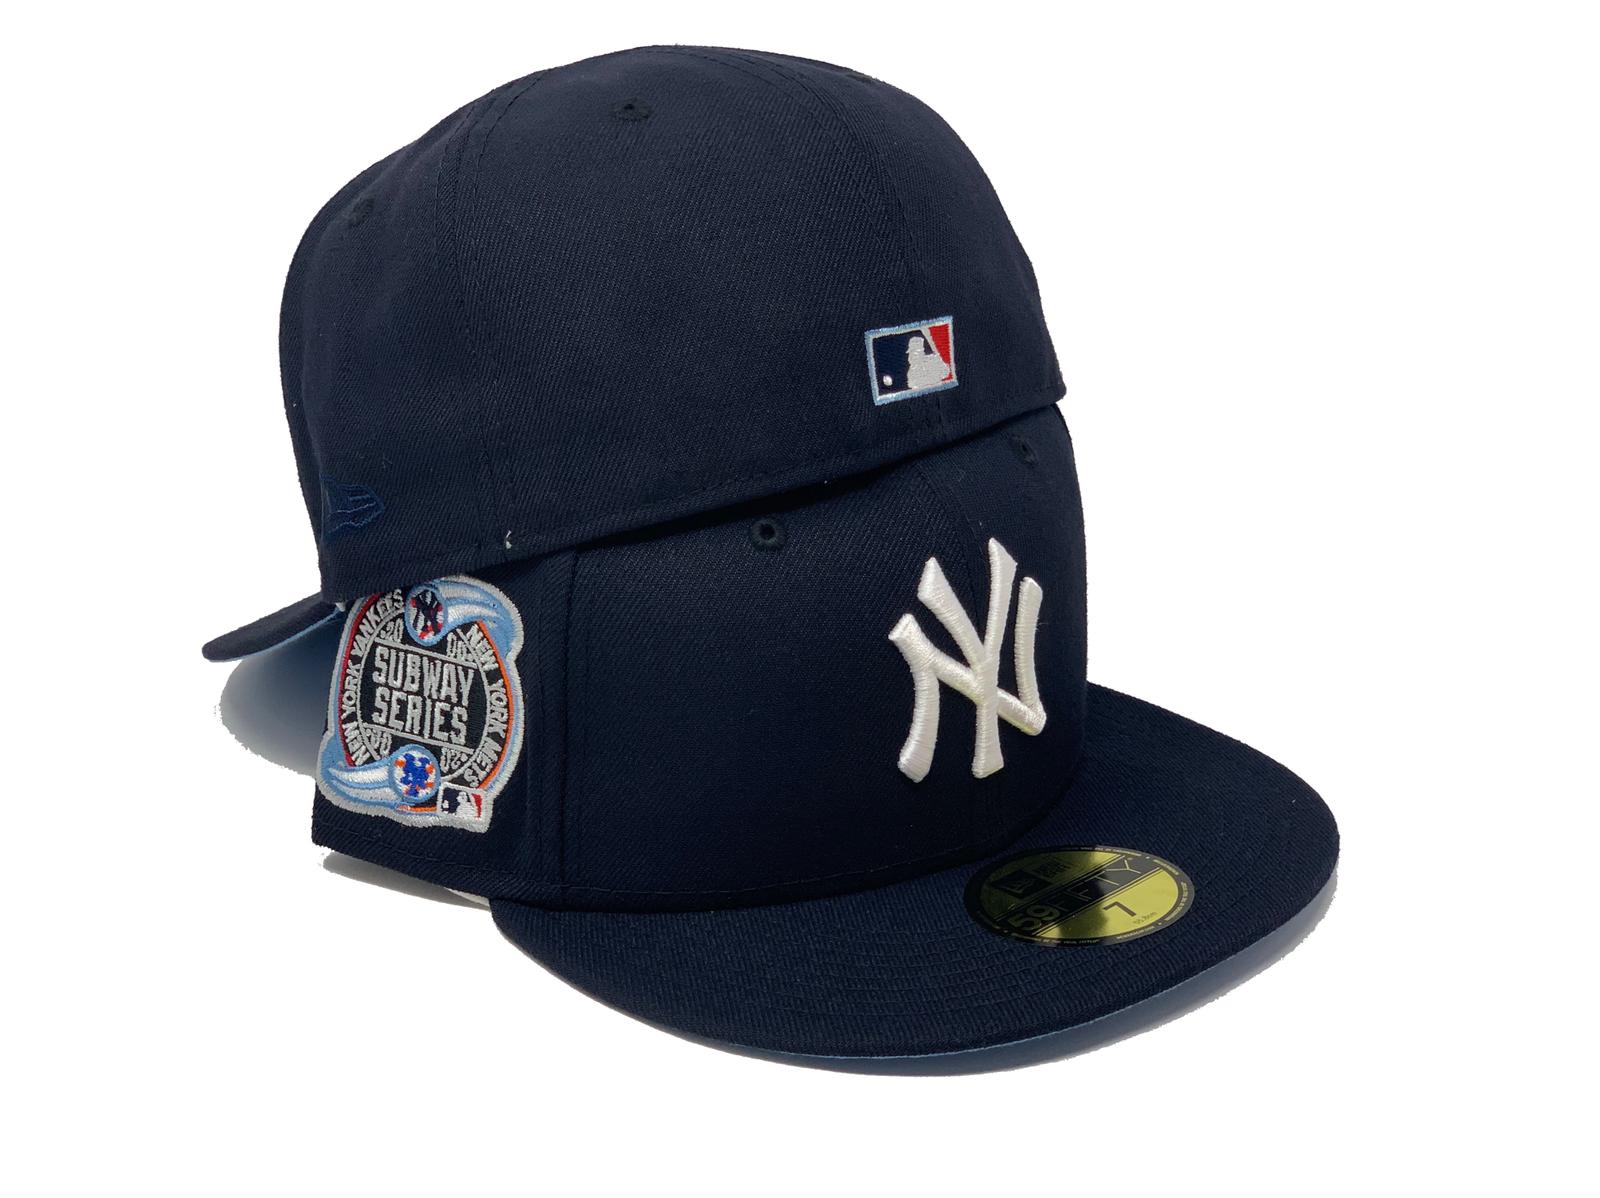 Navy Blue New York Yankees Subway Series On Field New Era Fitted